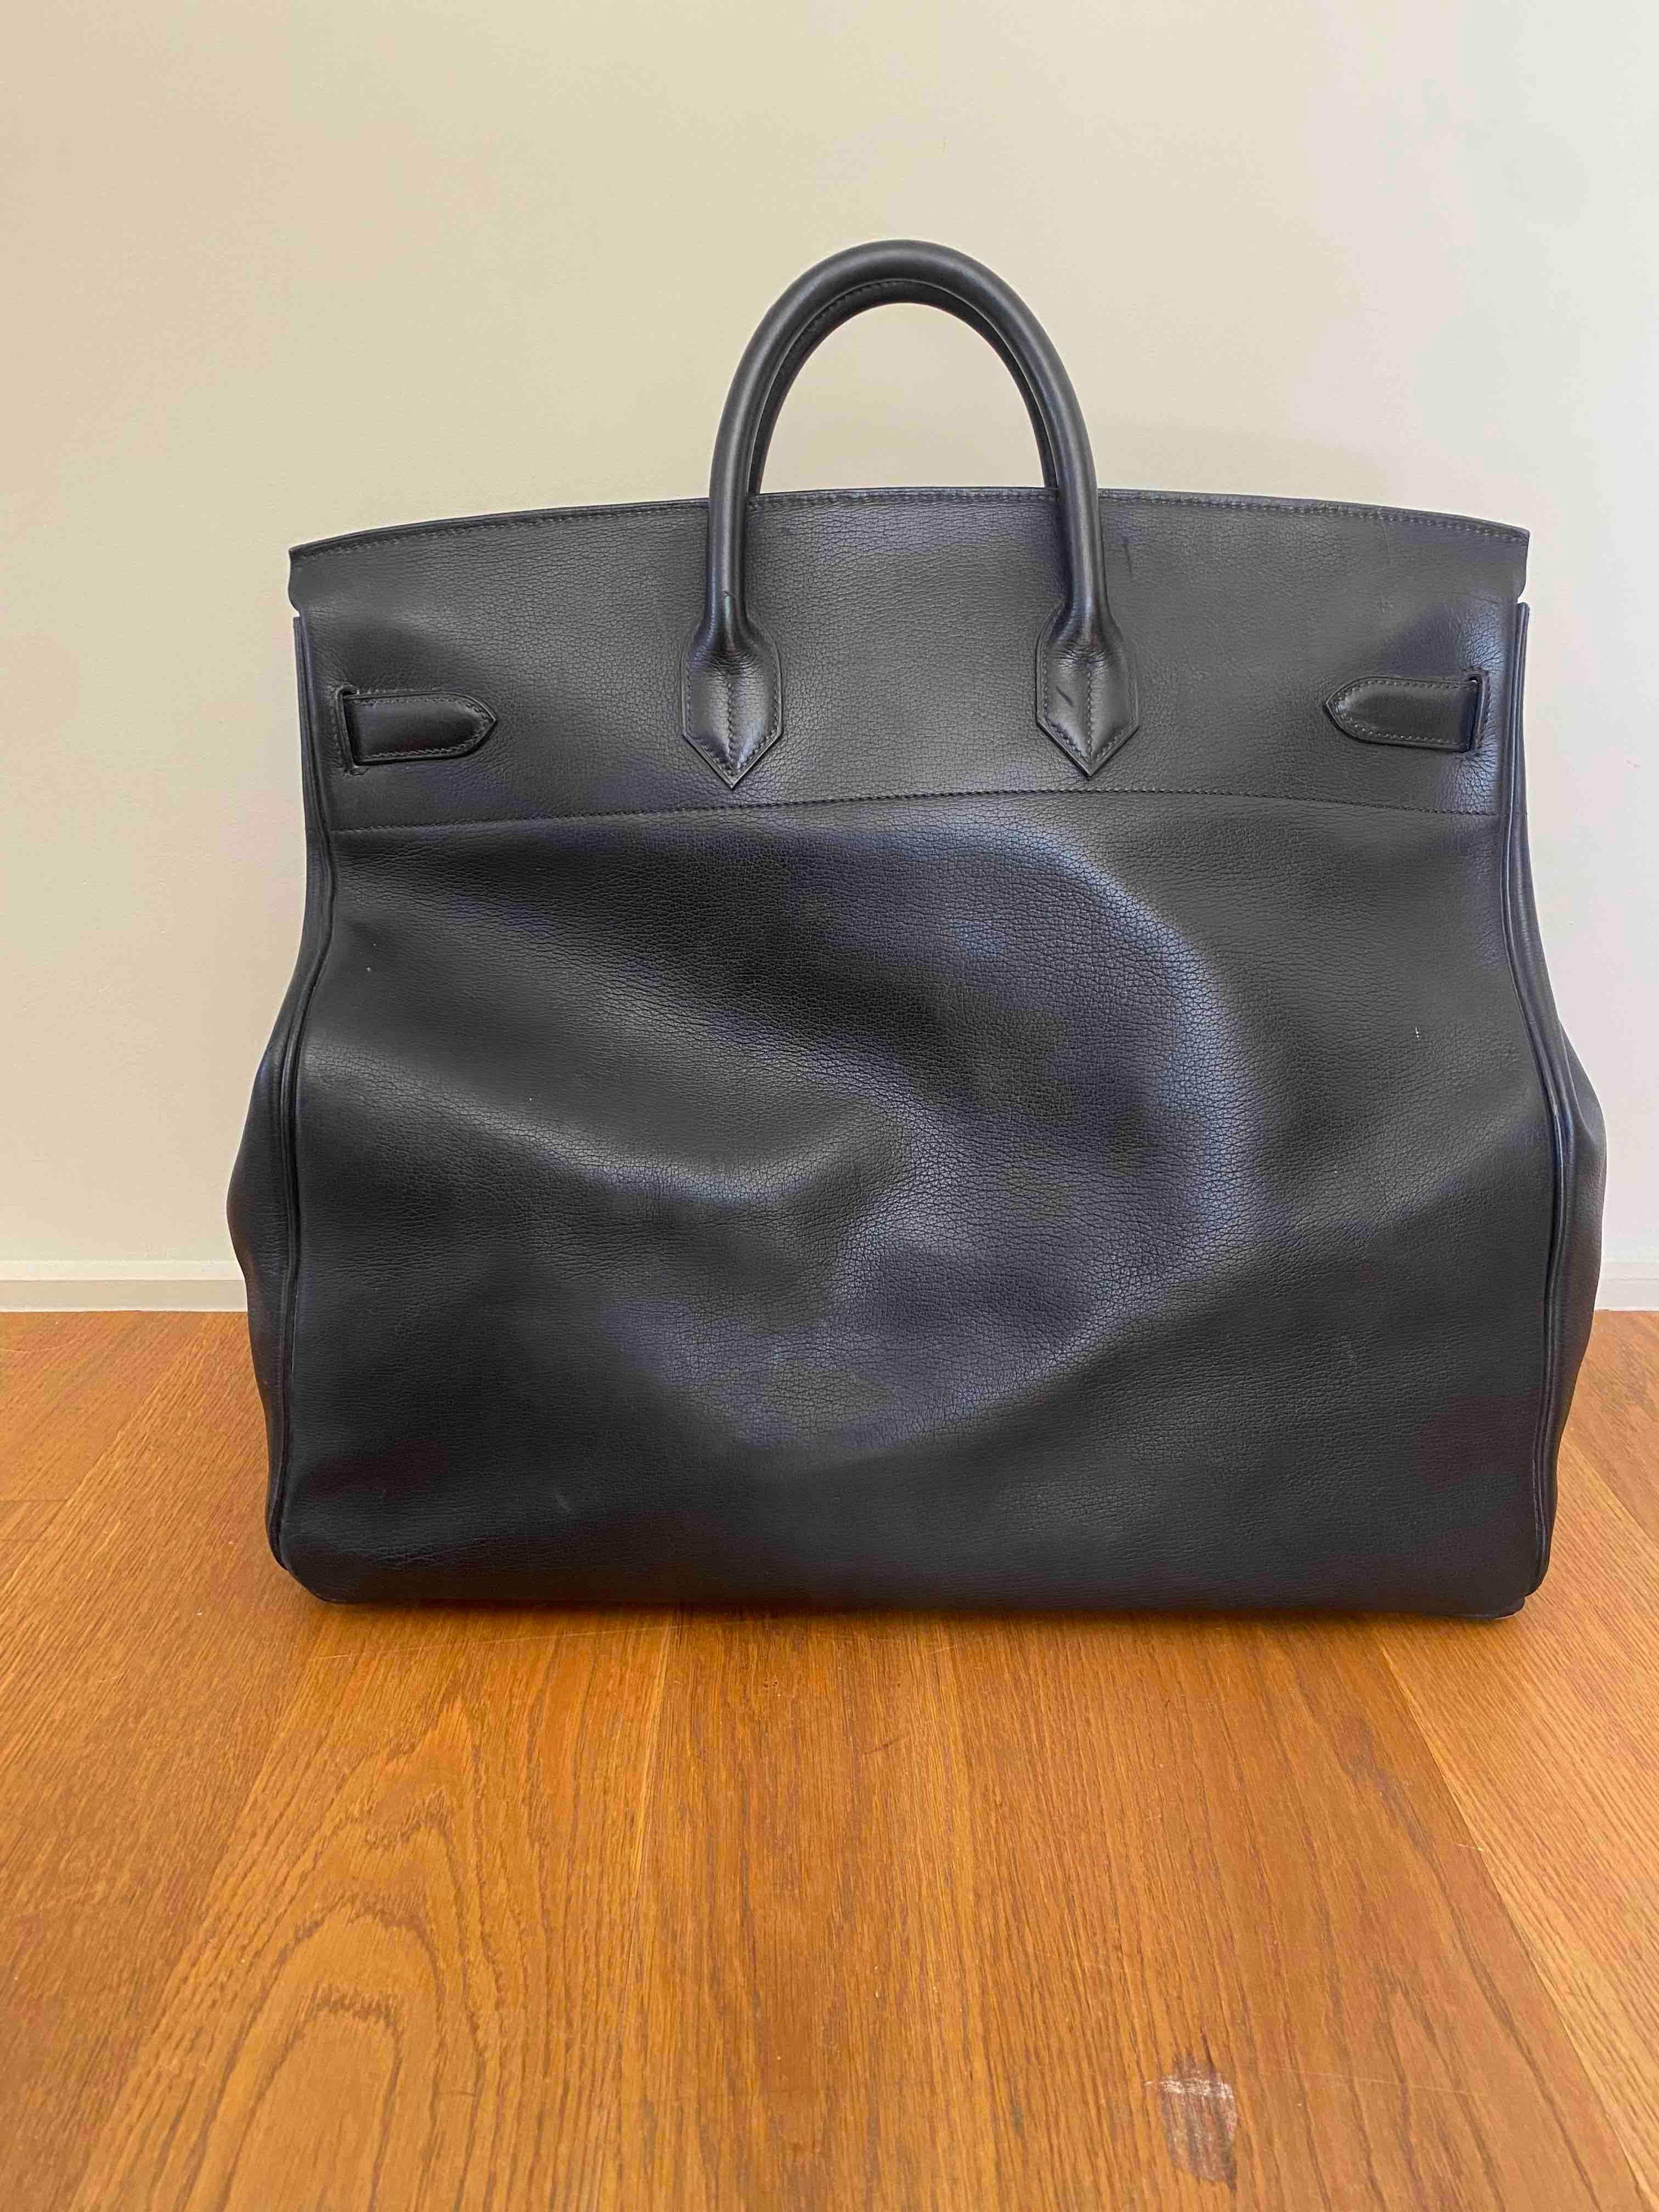 Vintage Hermes Hac 

Condition : Good condition
Country of manufacture : France
Gender : Unisex
Interior : black
Material : grained leather
Color : black
Dimensions: 50x28x53cm
Year : 1955
Jewelry : golden passed because of the years
Details : One